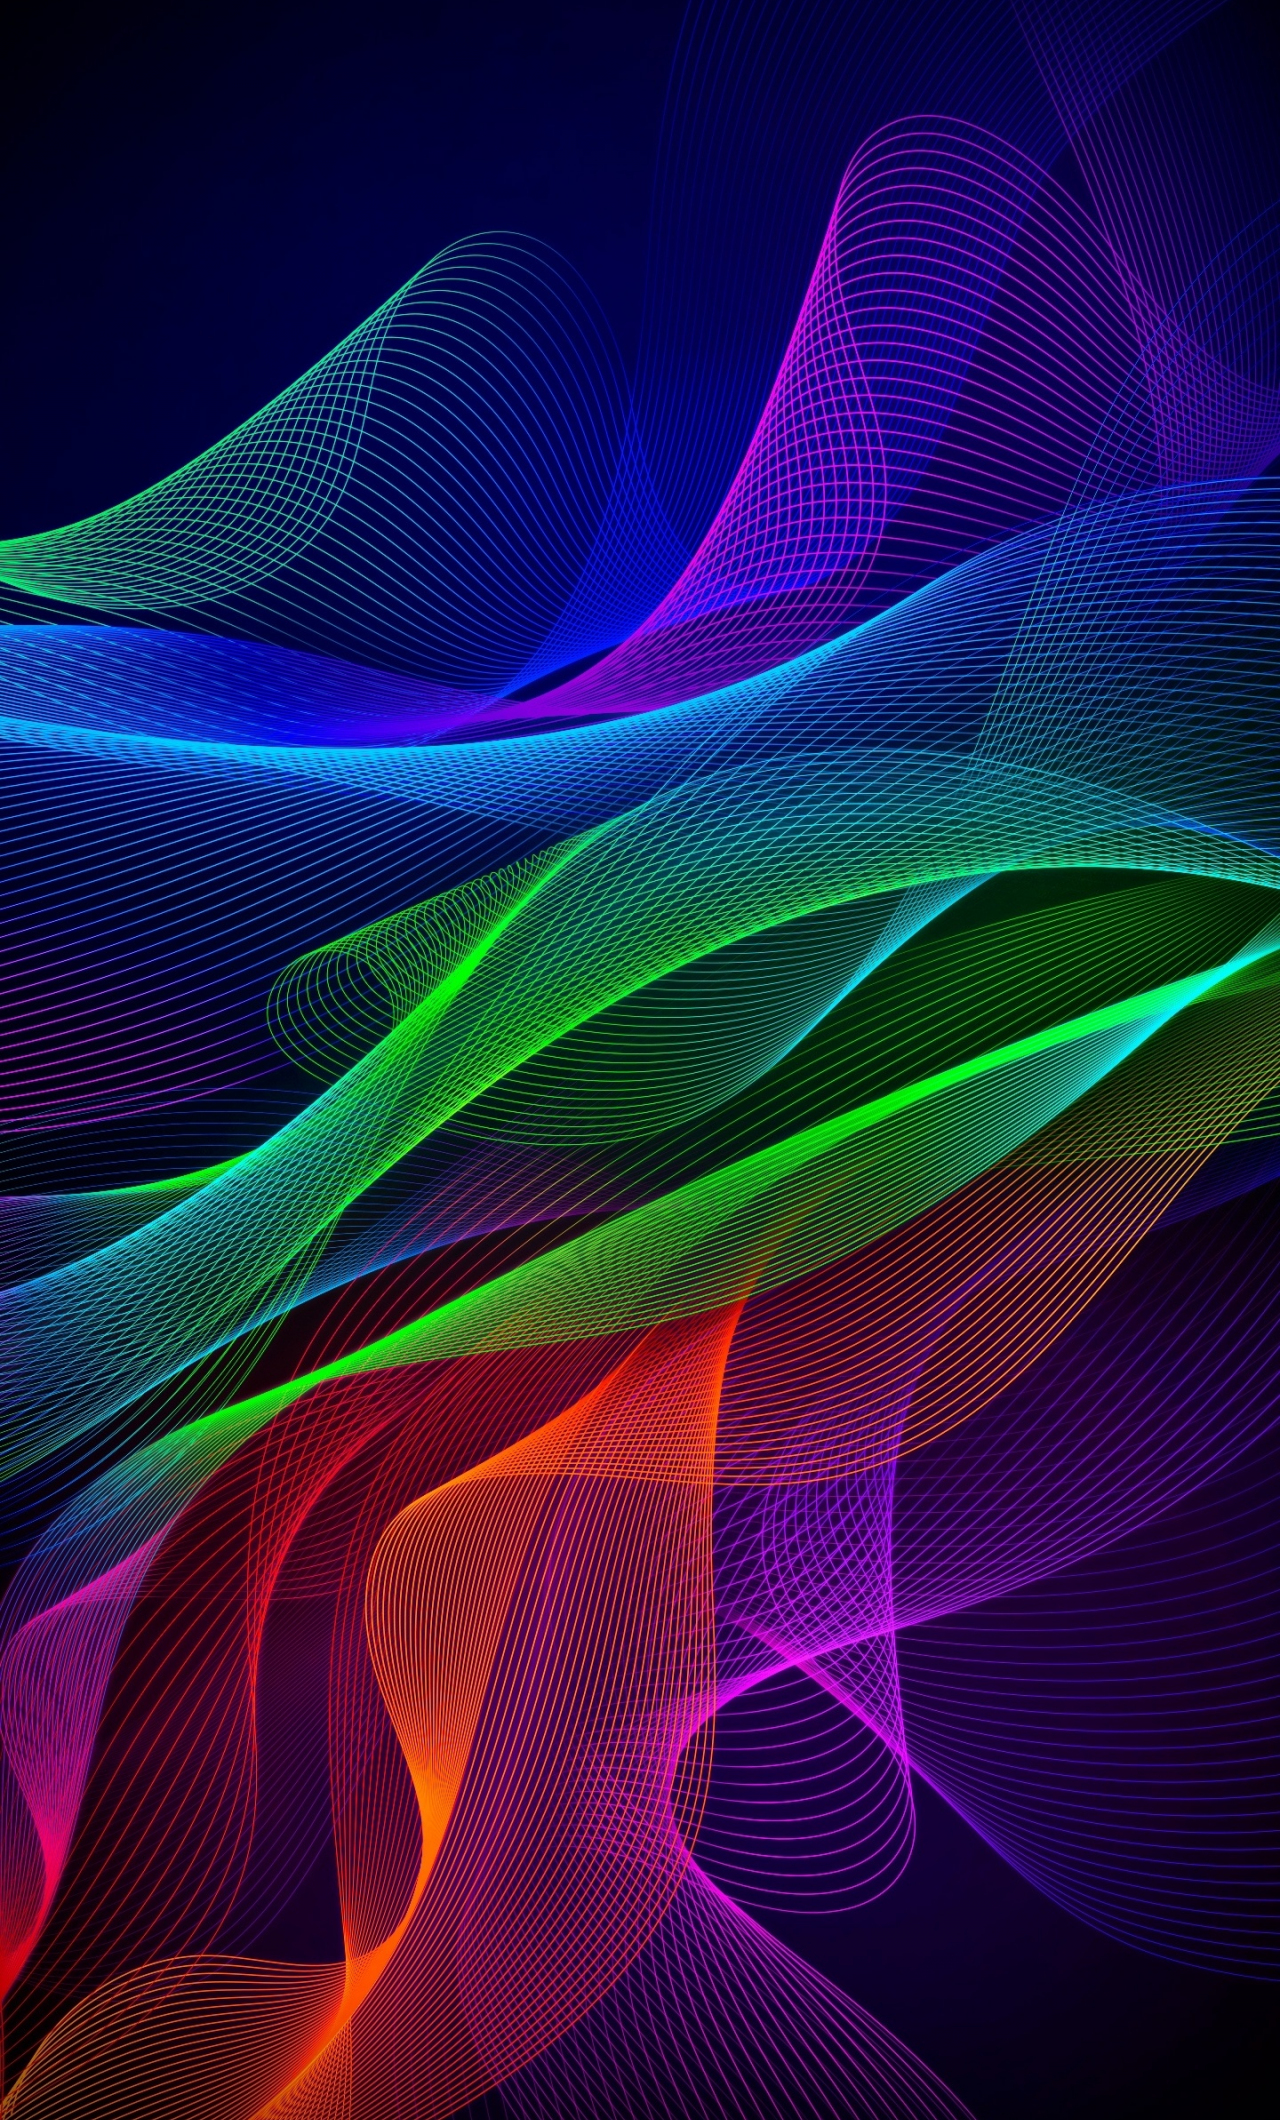 Download 1280x21 Wallpaper Colorful Lines Abstract Razer Phone Stock Iphone 6 Plus 1280x21 Hd Image Background